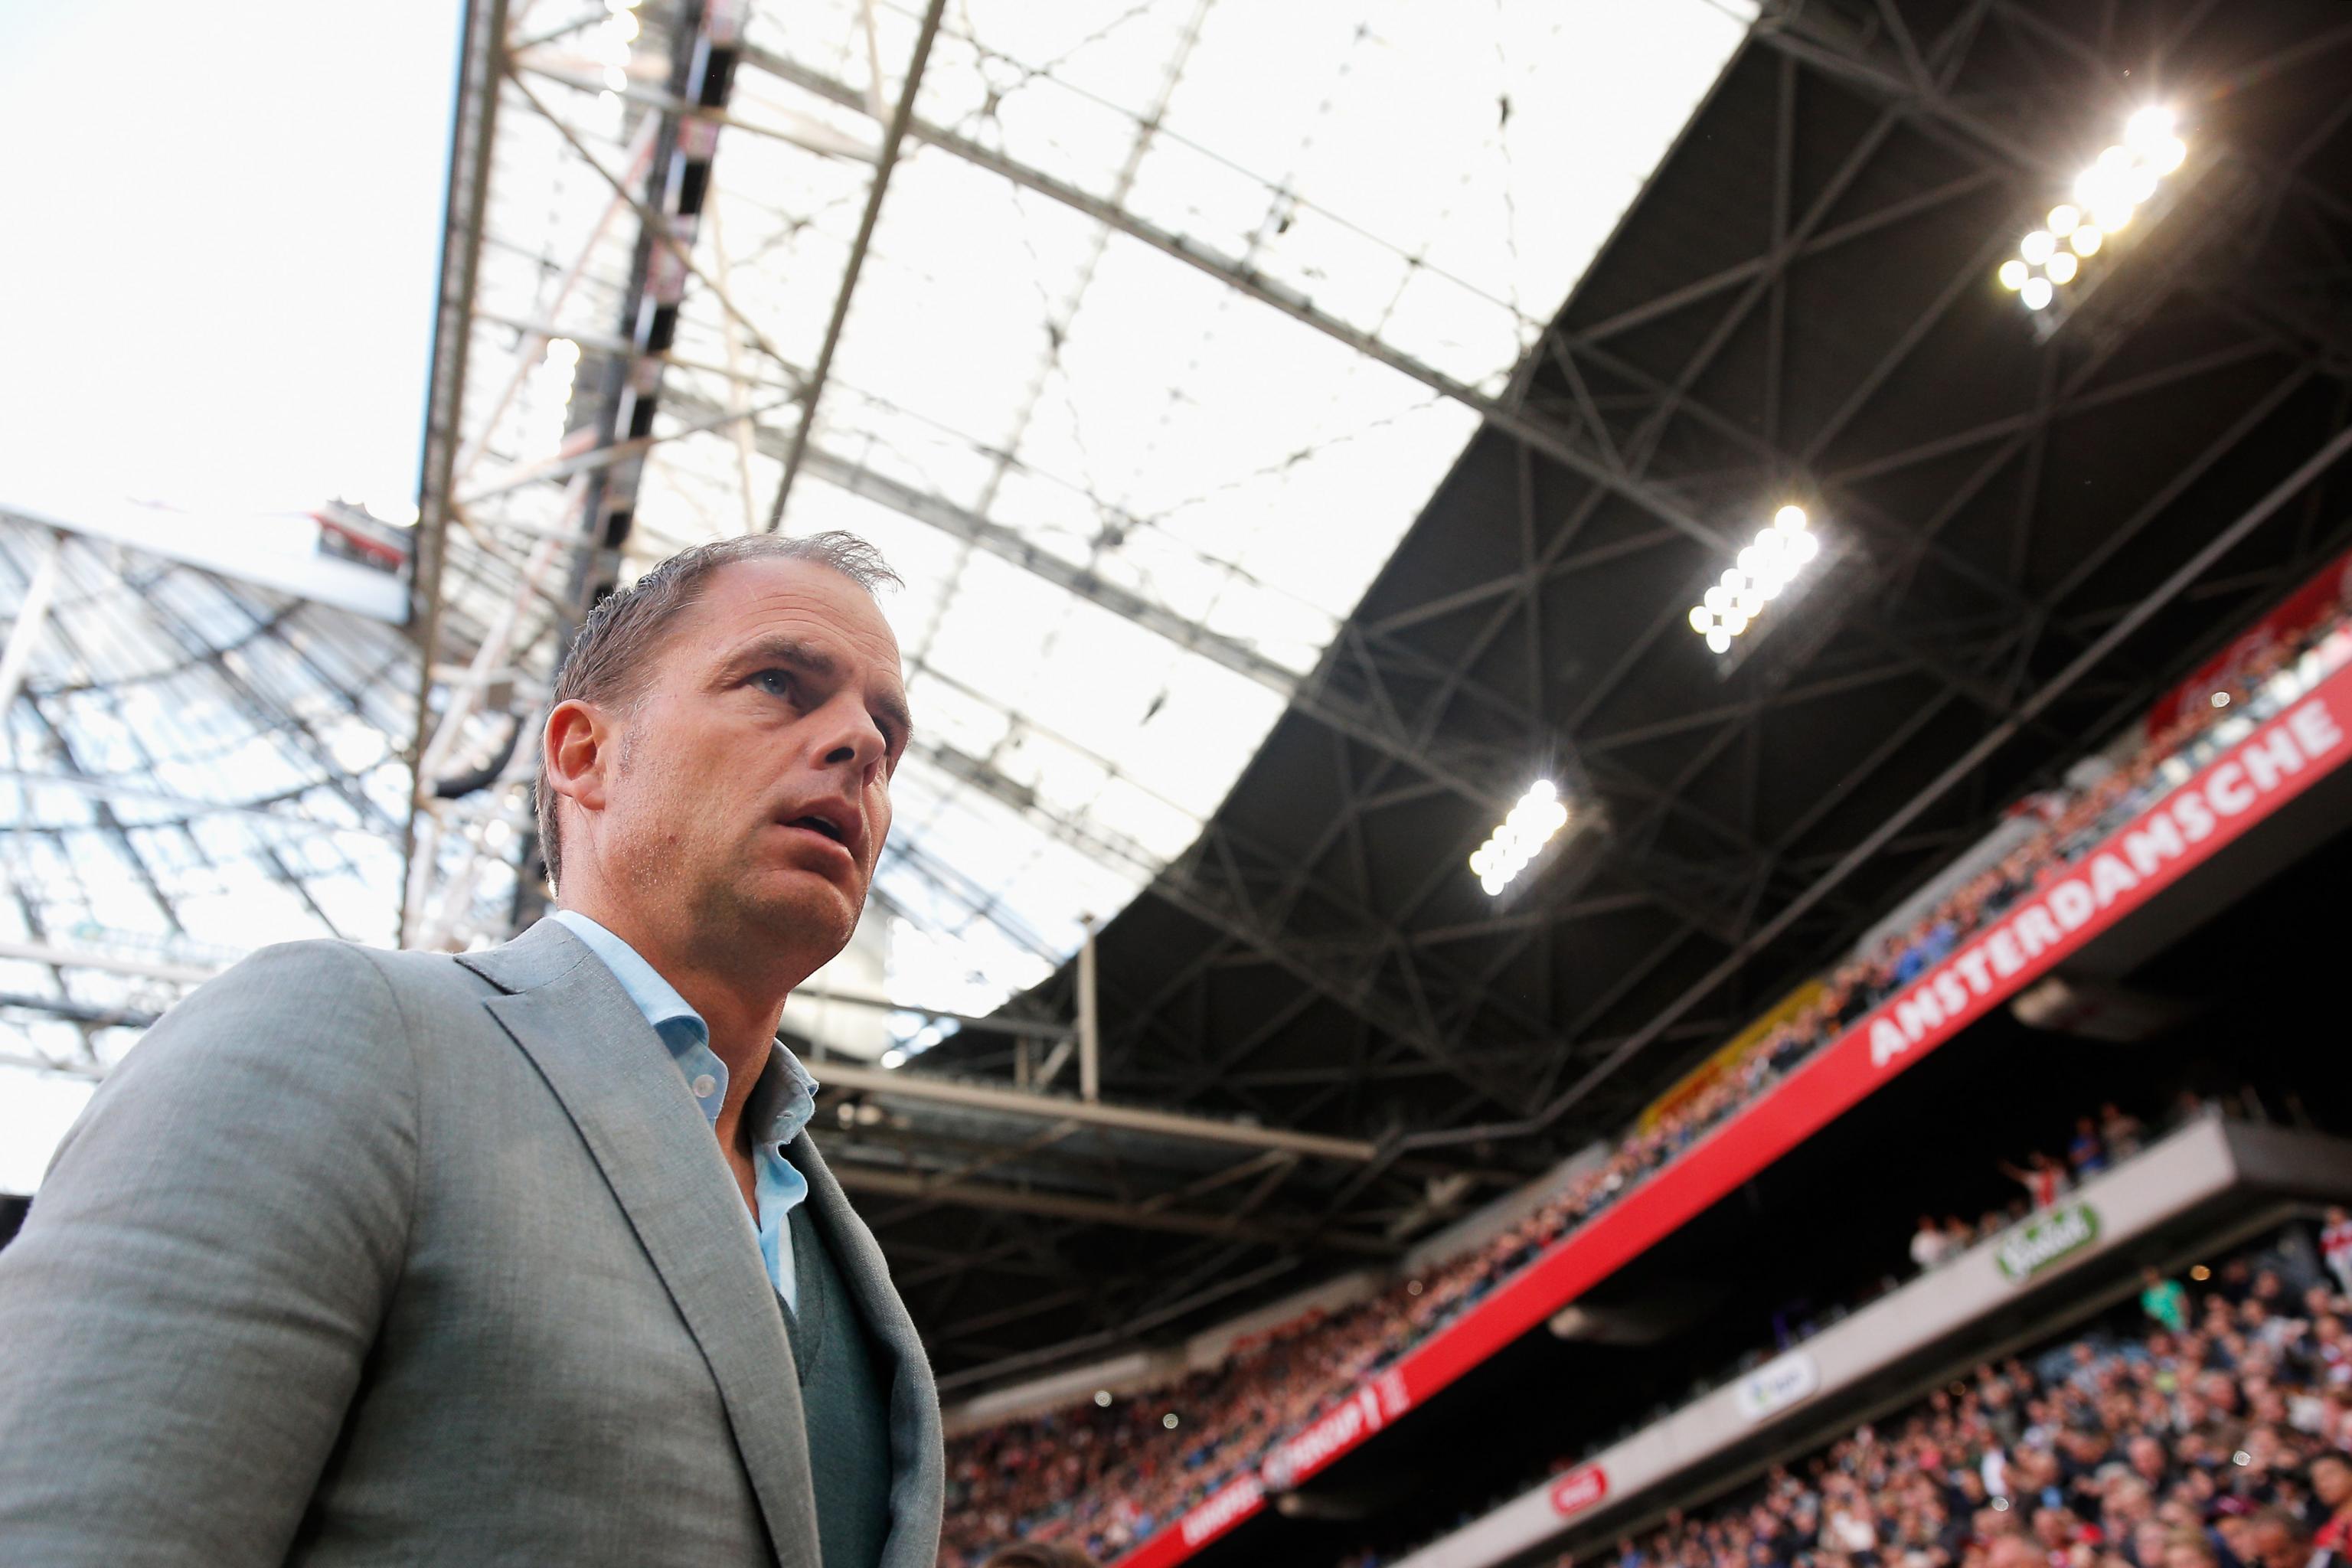 KNVB Beker Final: Ajax find the 5-1 defeat hard to Zwolle